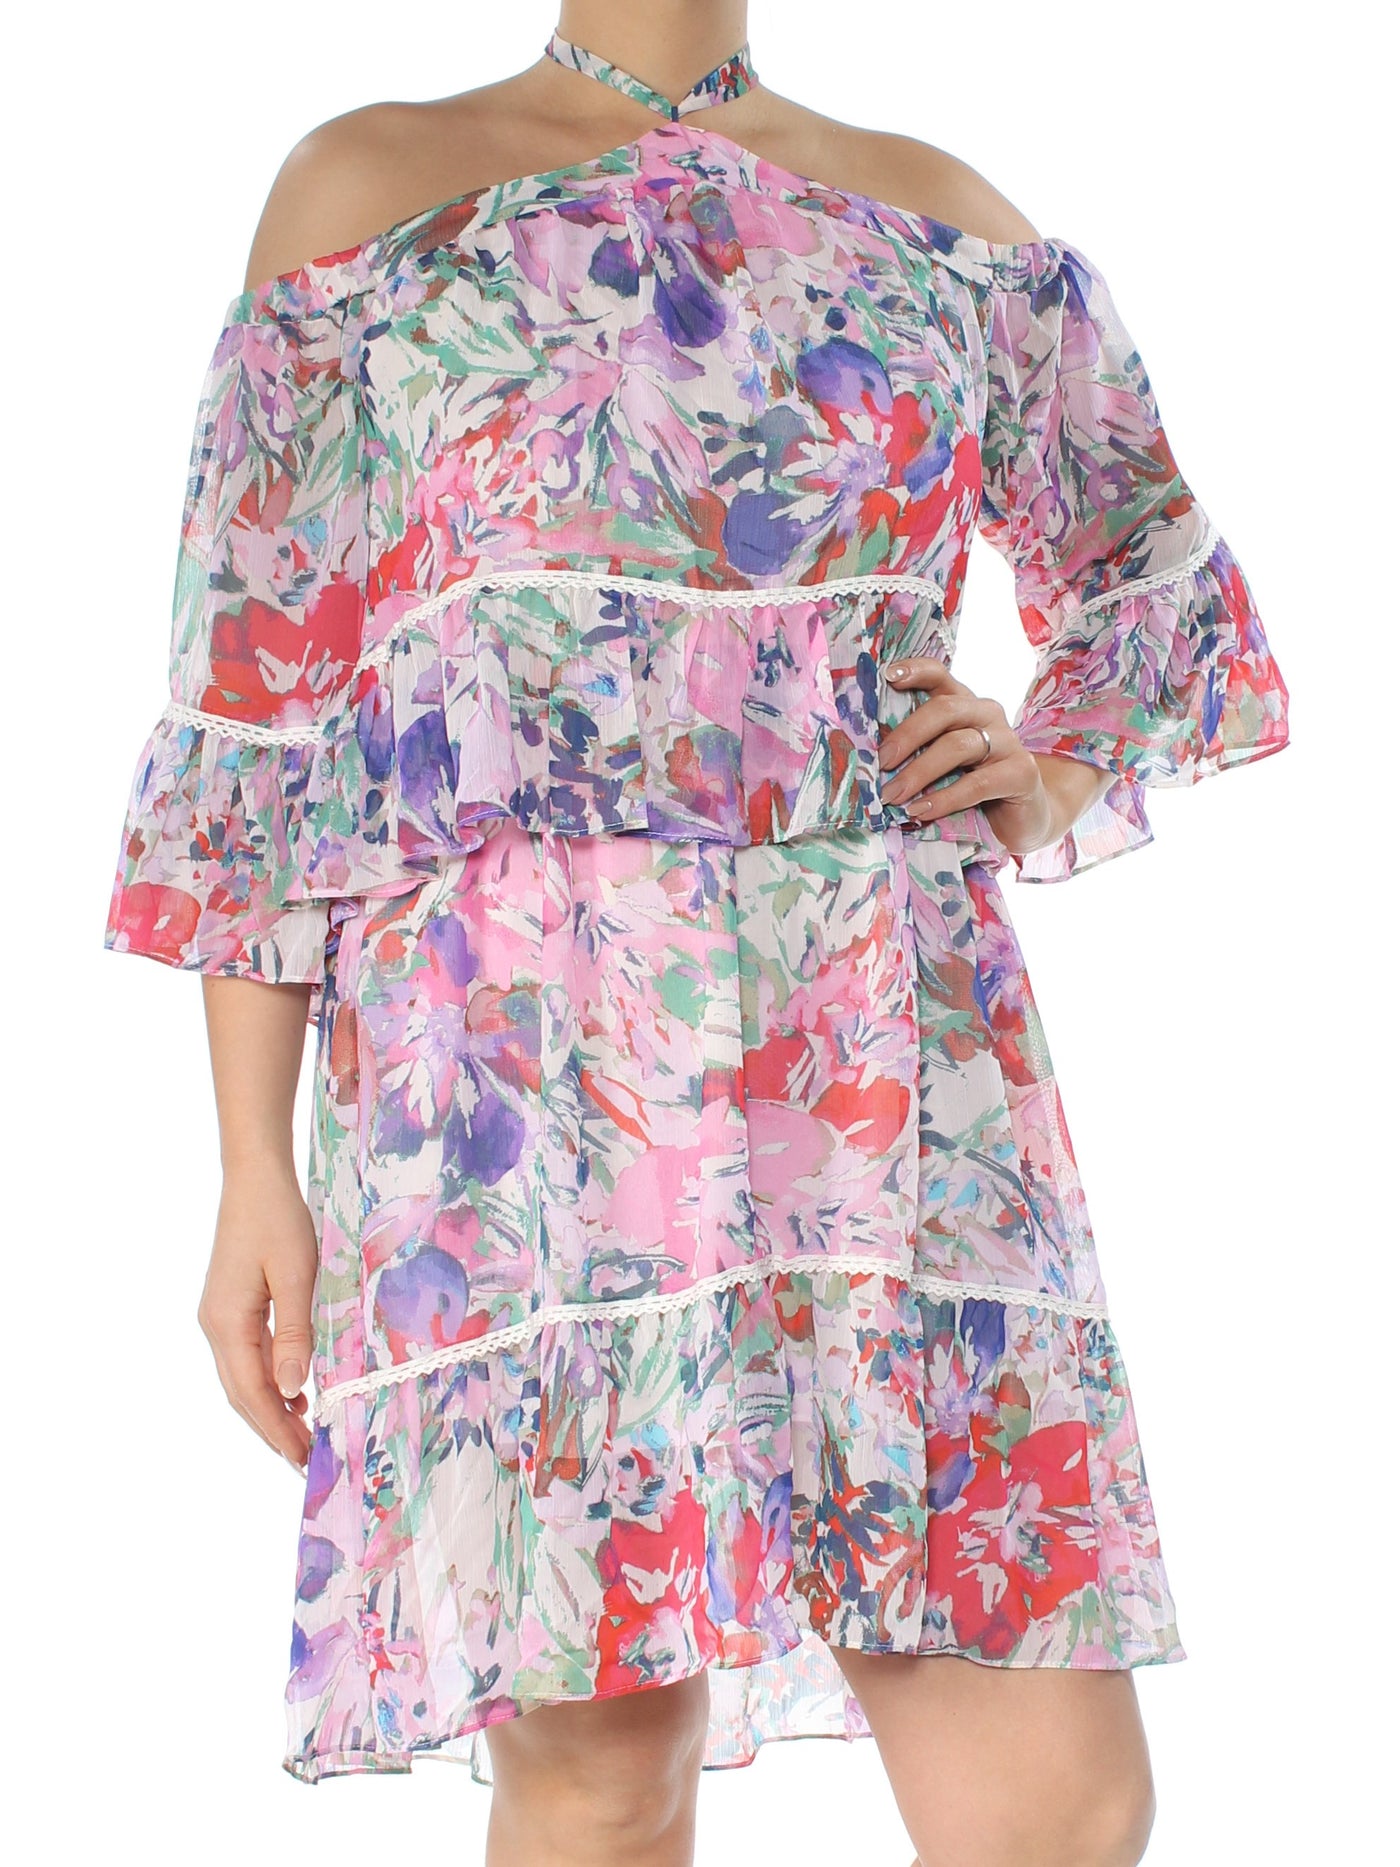 RACHEL ROY Womens Pink Cold Shoulder Printed 3/4 Sleeve Grecian Neckline Above The Knee Cocktail Blouson Dress